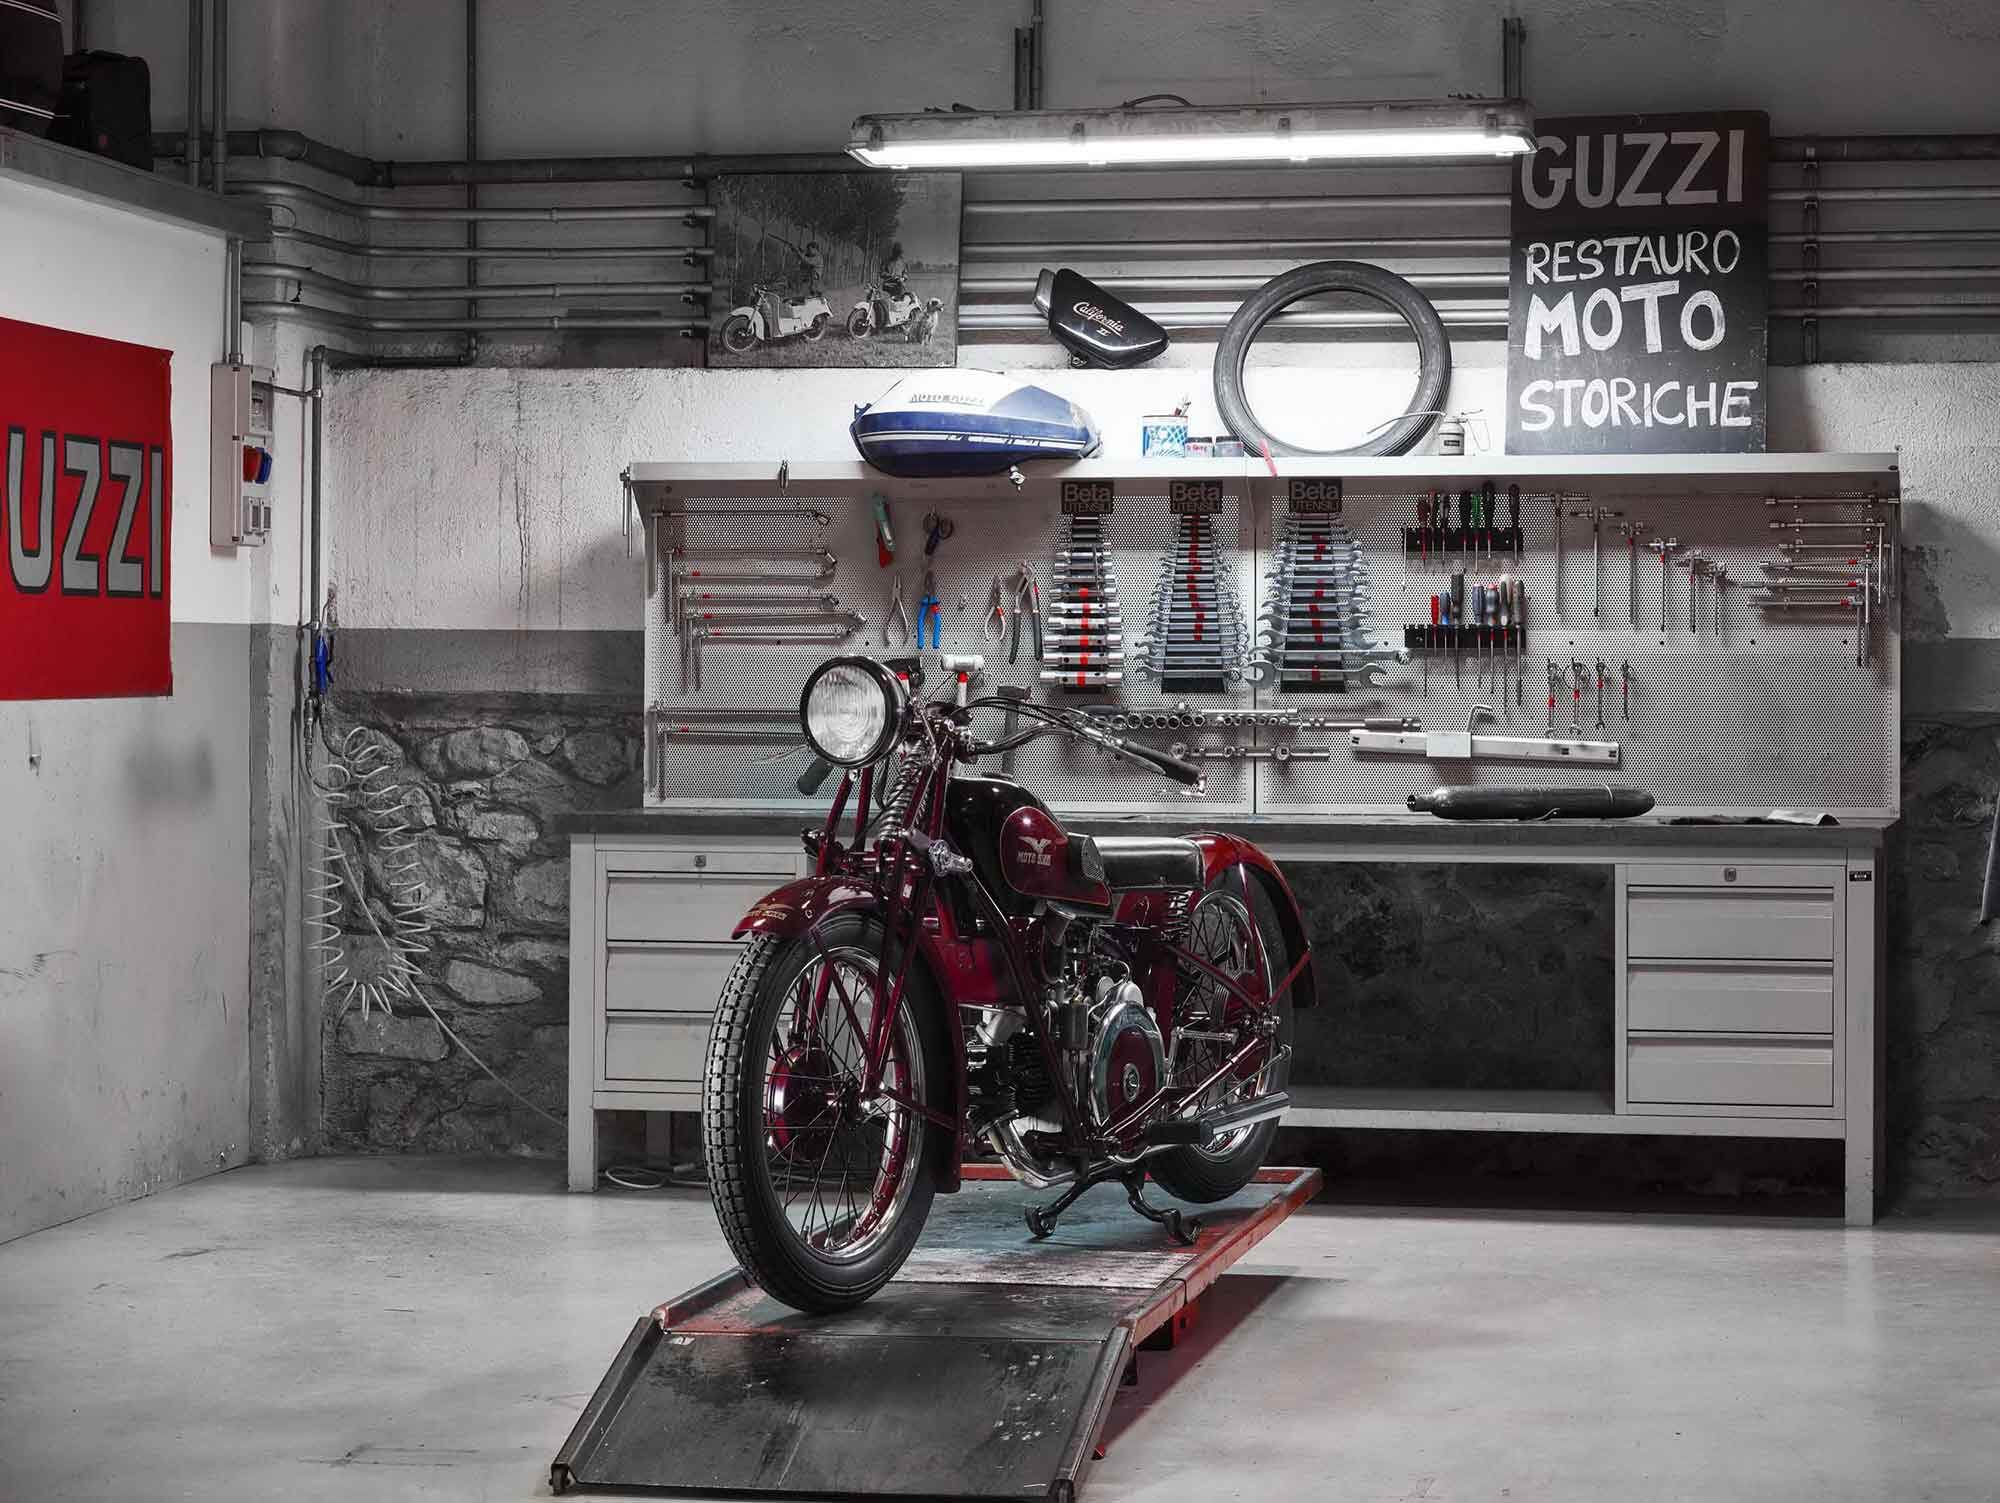 In 1928, Giuseppe Guzzi rode a new Moto Guzzi model 4,000 miles from the company headquarters to Capo Nord, Norway, in the Arctic Circle, showcasing his bike’s then-new (and radical) swingarm rear suspension. Consequently, a Guzzi “Norge” gets its own prominent display.